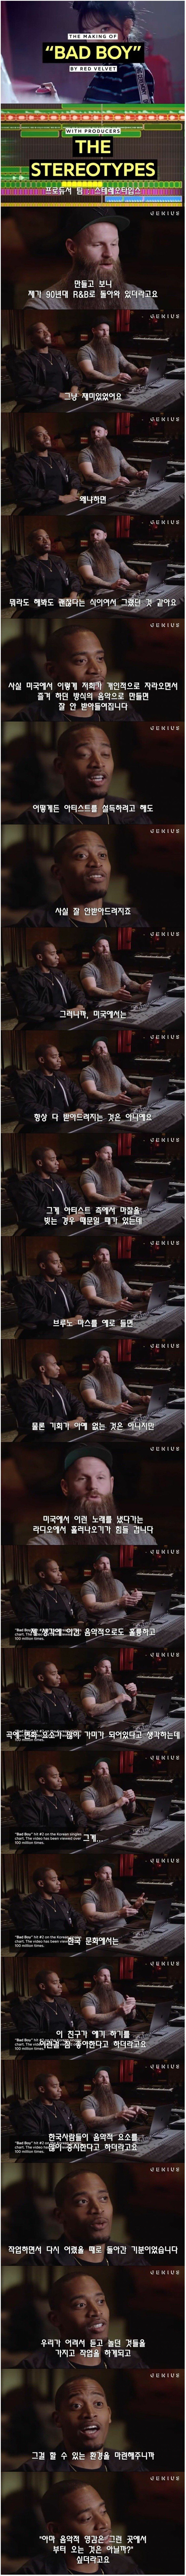 The reason why foreign composers like to work with Korean singers